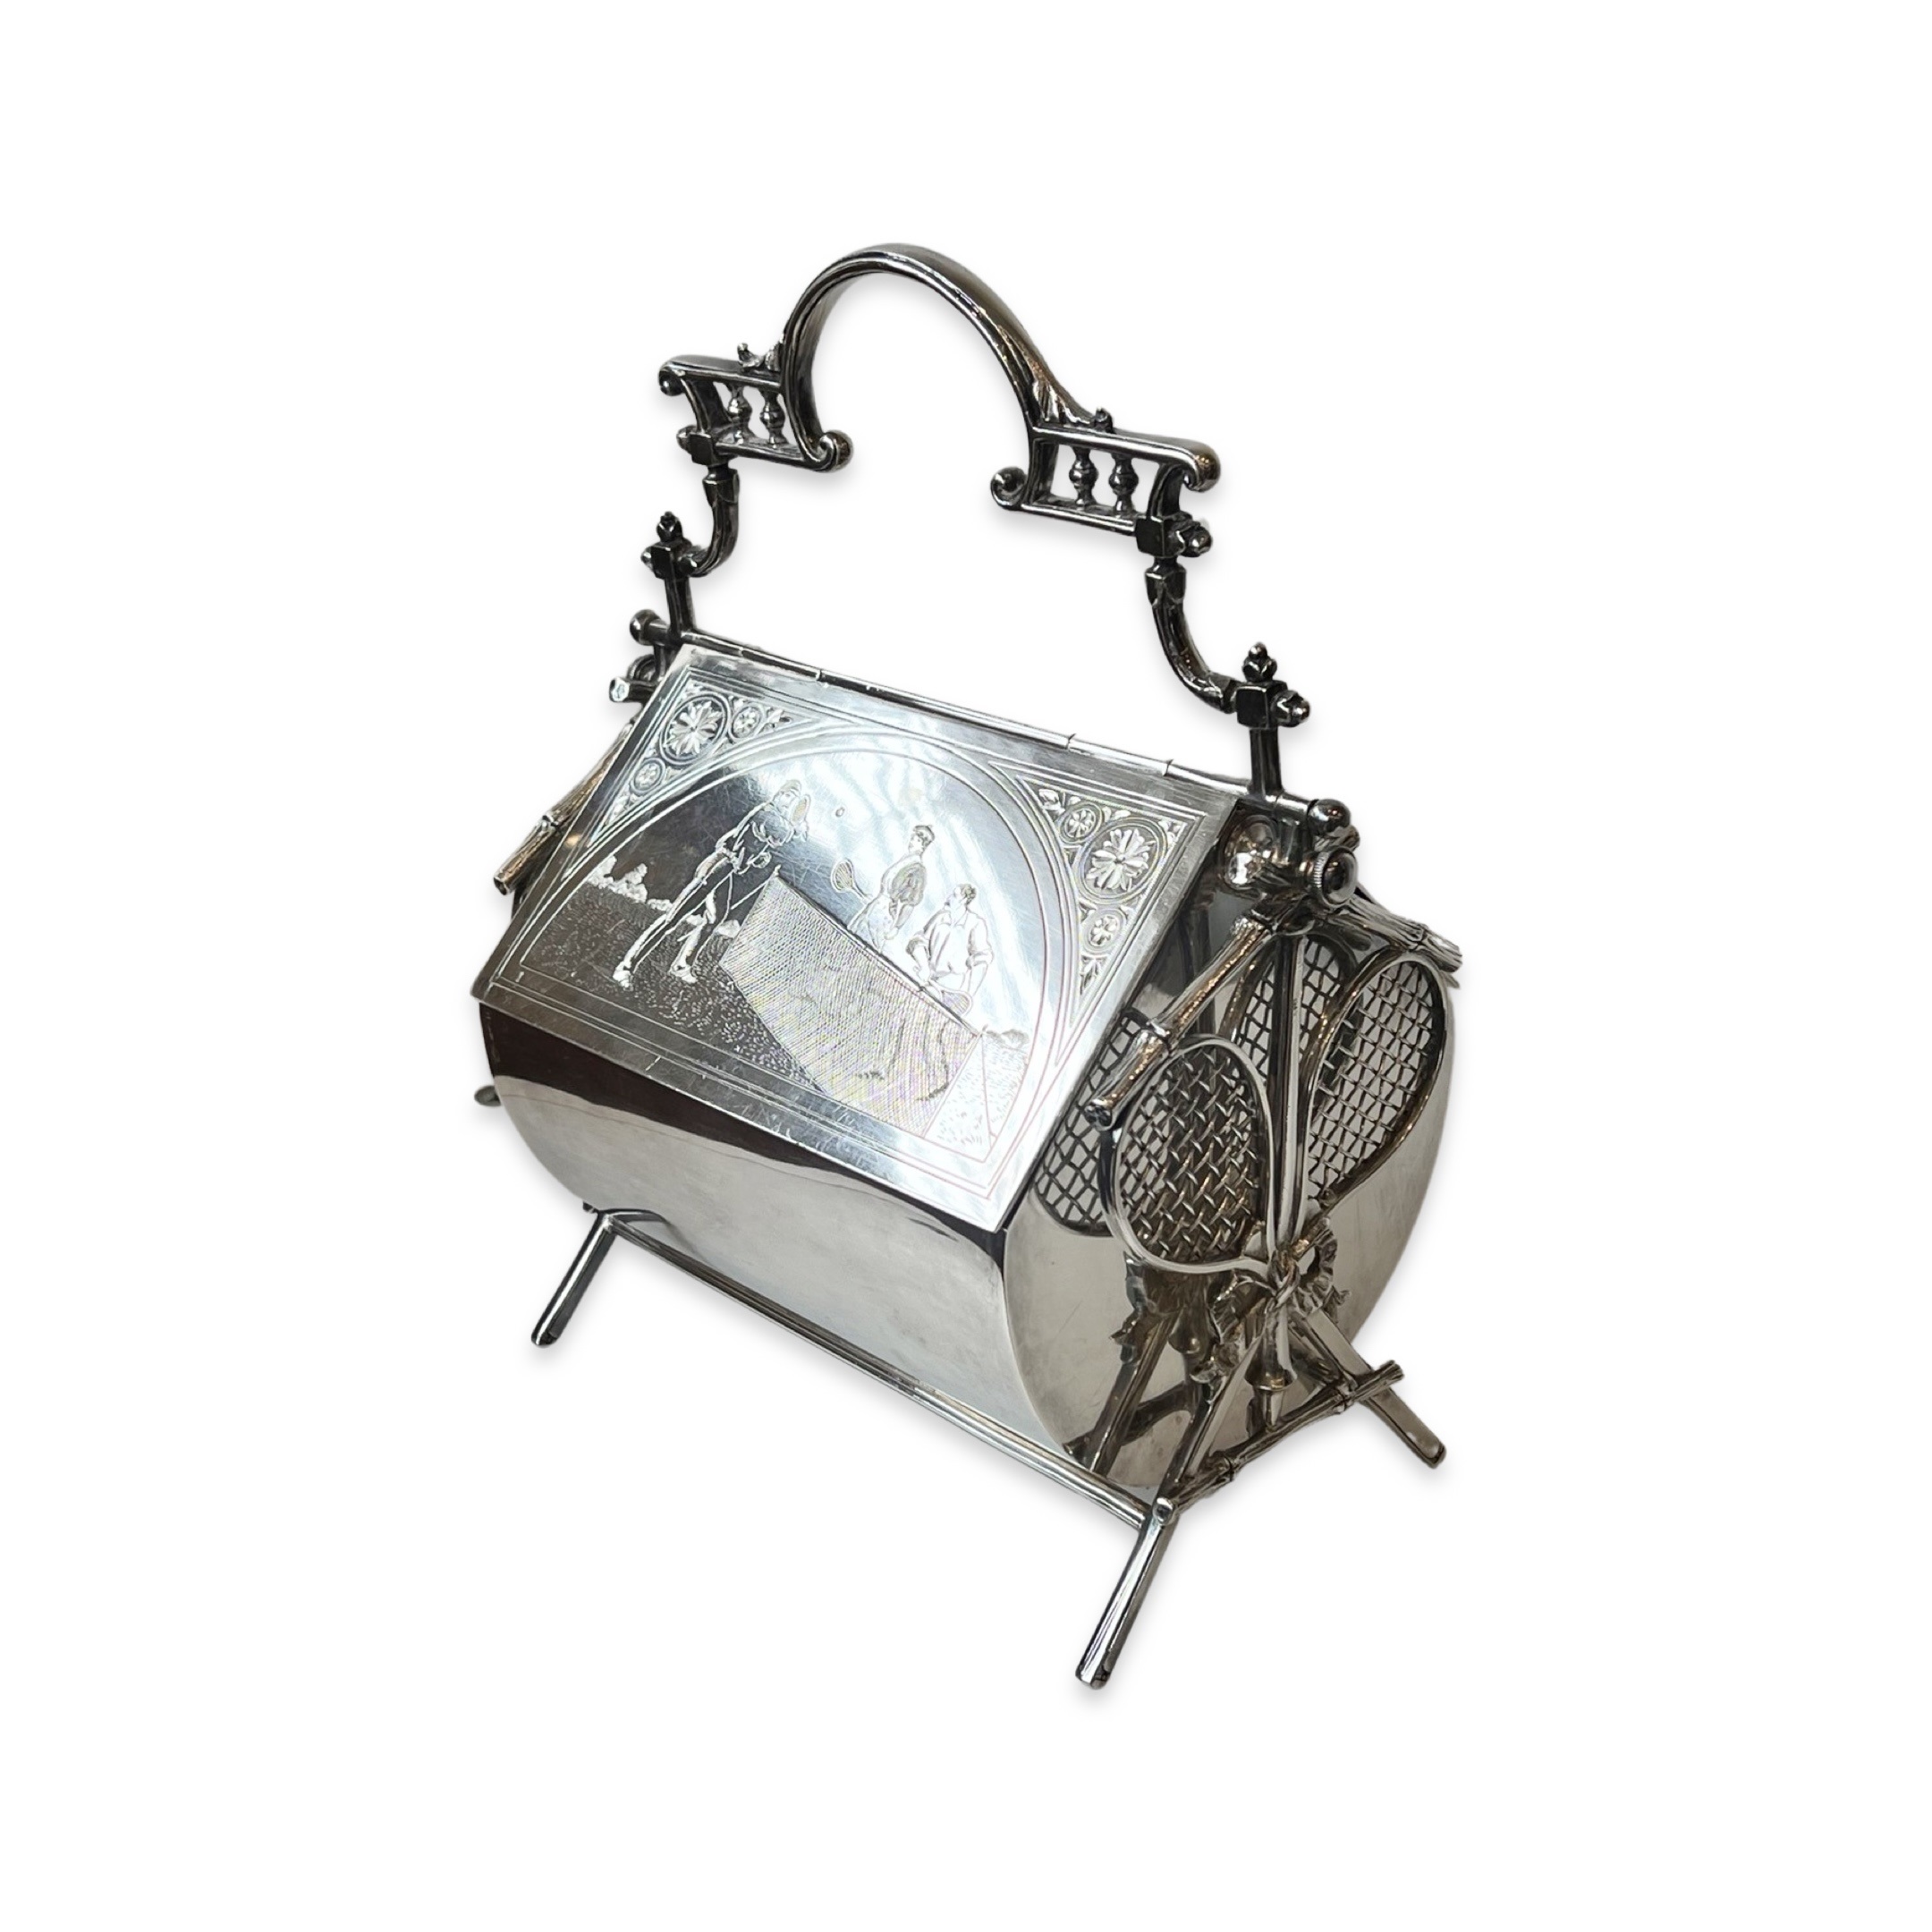 A RARE EARLY 20TH CENTURY NOVELTY SILVER PLATED 'TENNIS' BISCUIT BOX C. 1900 - Image 6 of 7